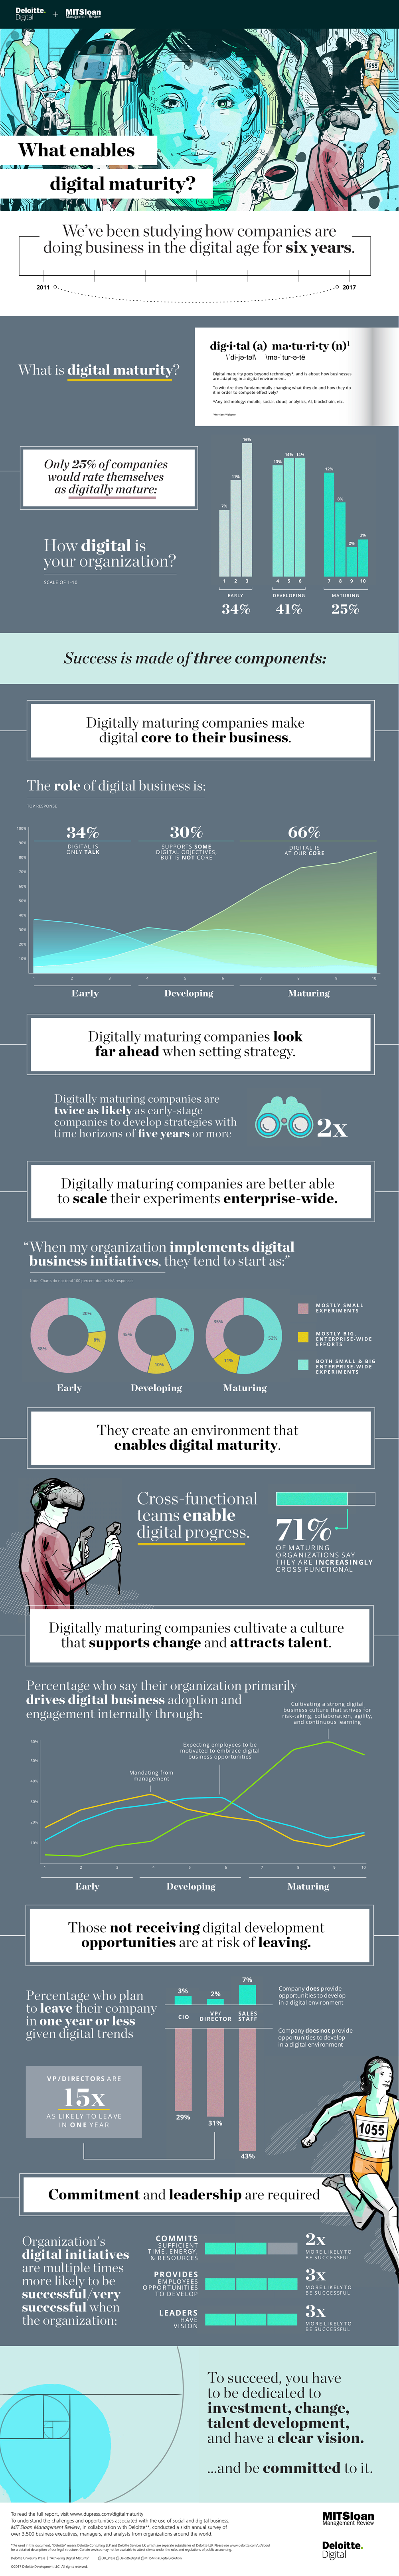 What enables digital maturity?